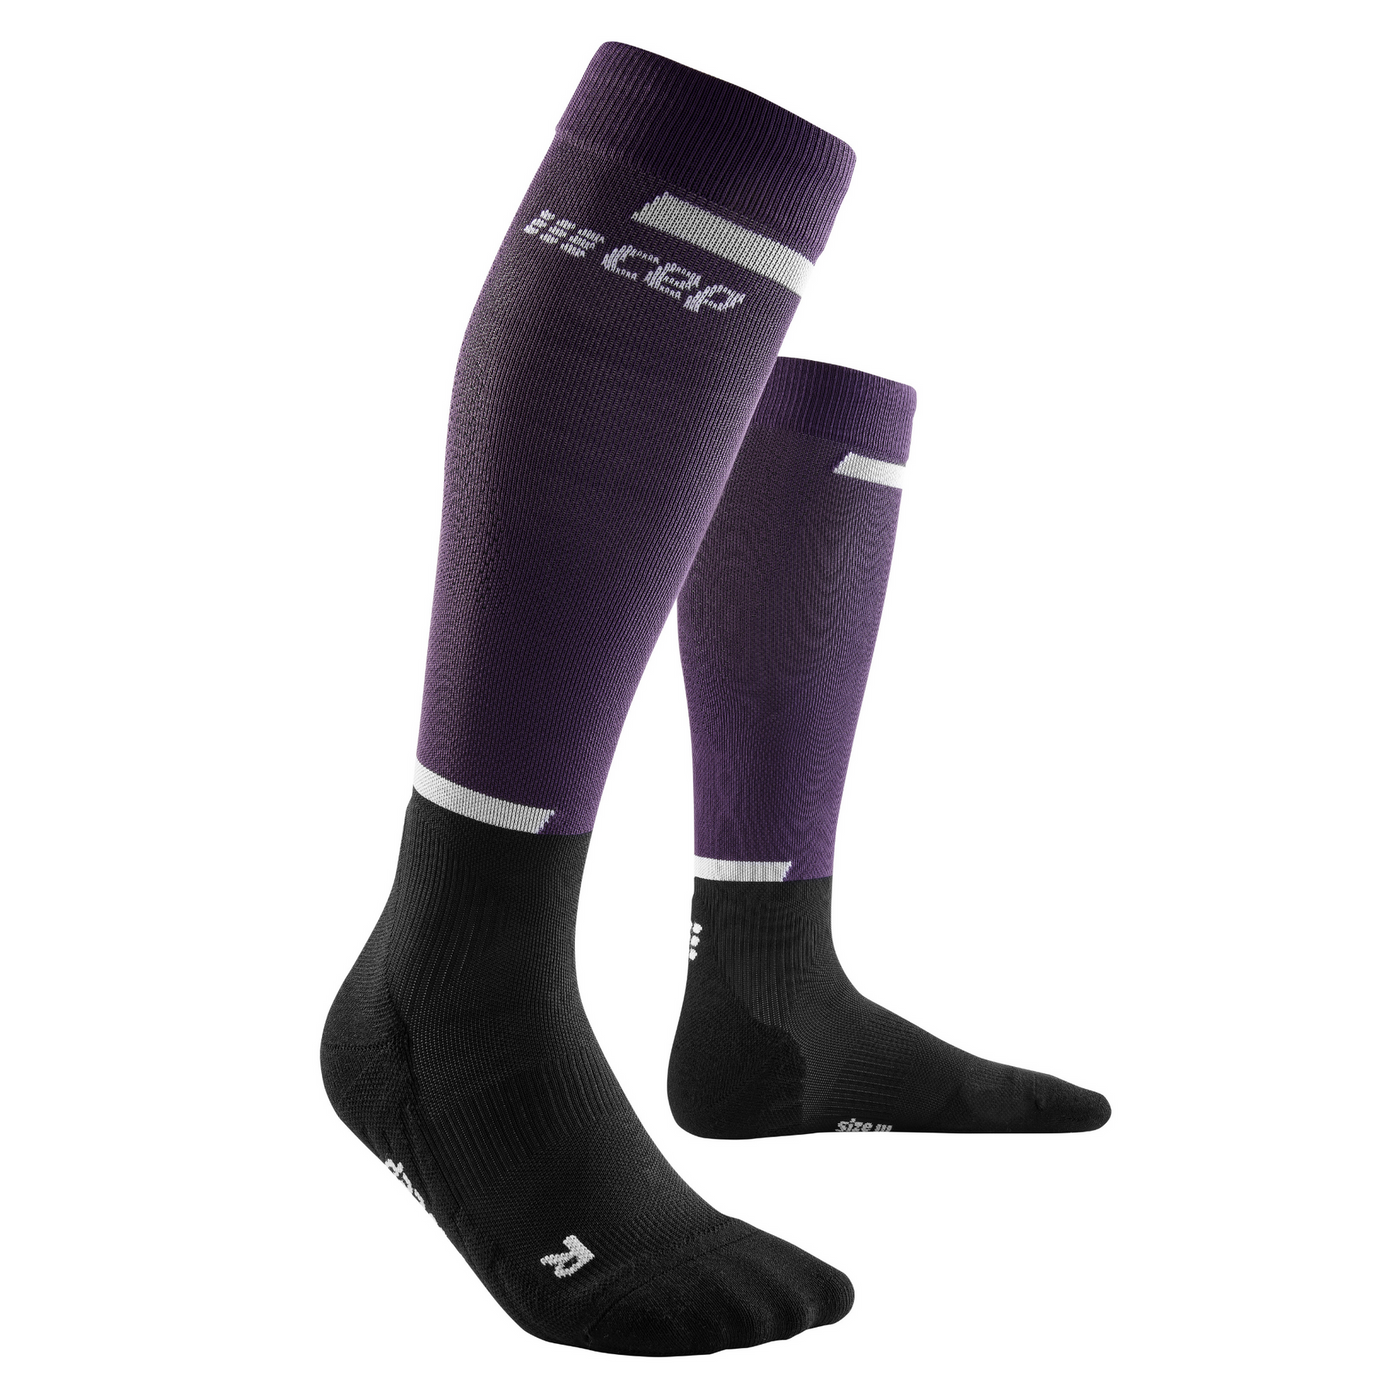 CEP The Run Compression Tall 4.0 Women's Cycling Socks (Violet/Black)